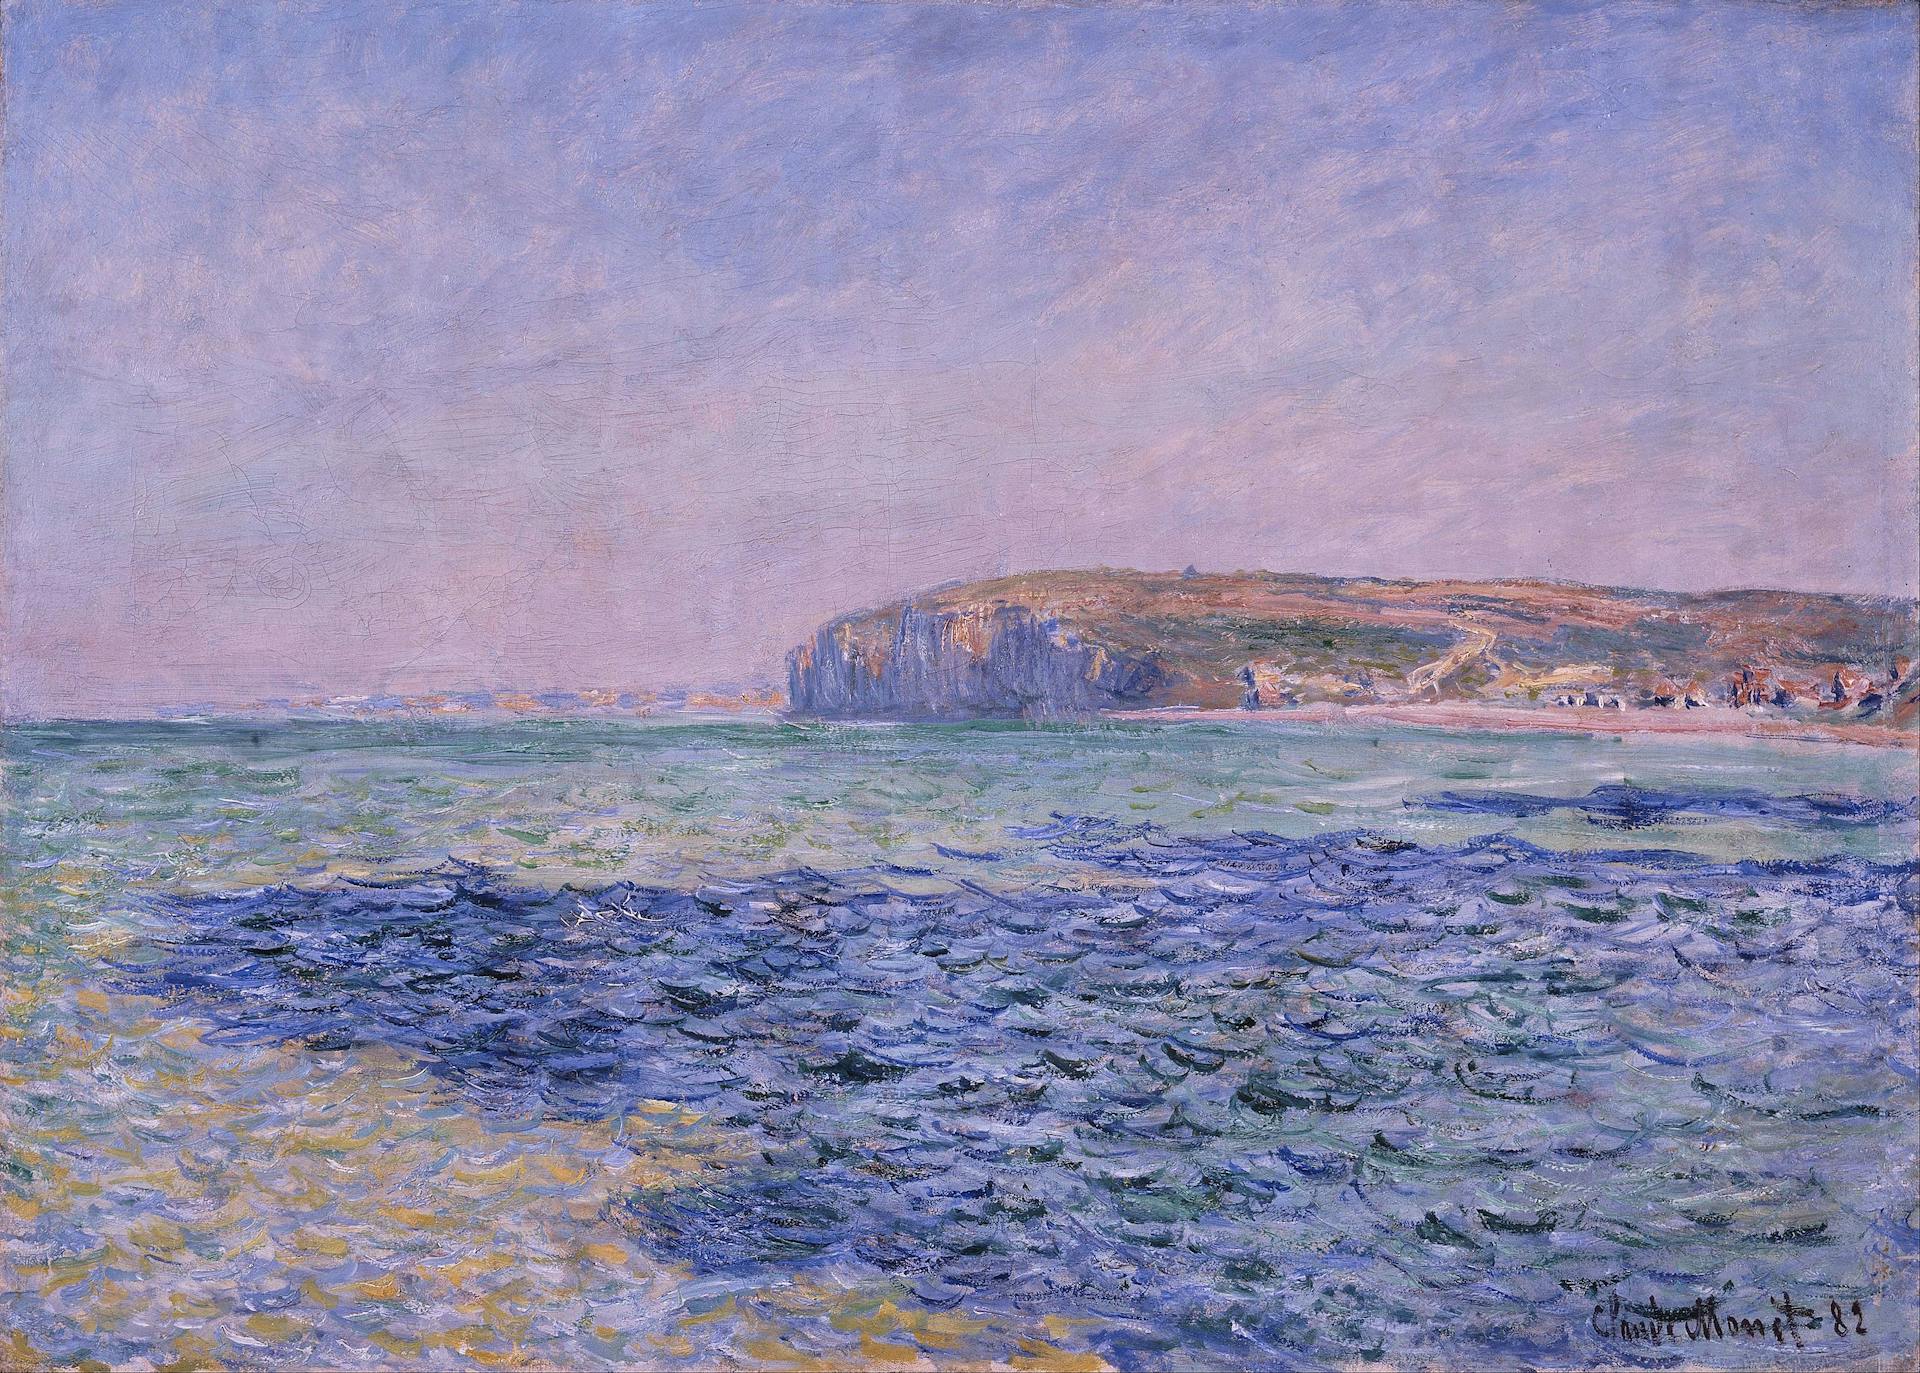 Claude Monet, Shadows on the Sea. The Cliffs at Pourville, 1882